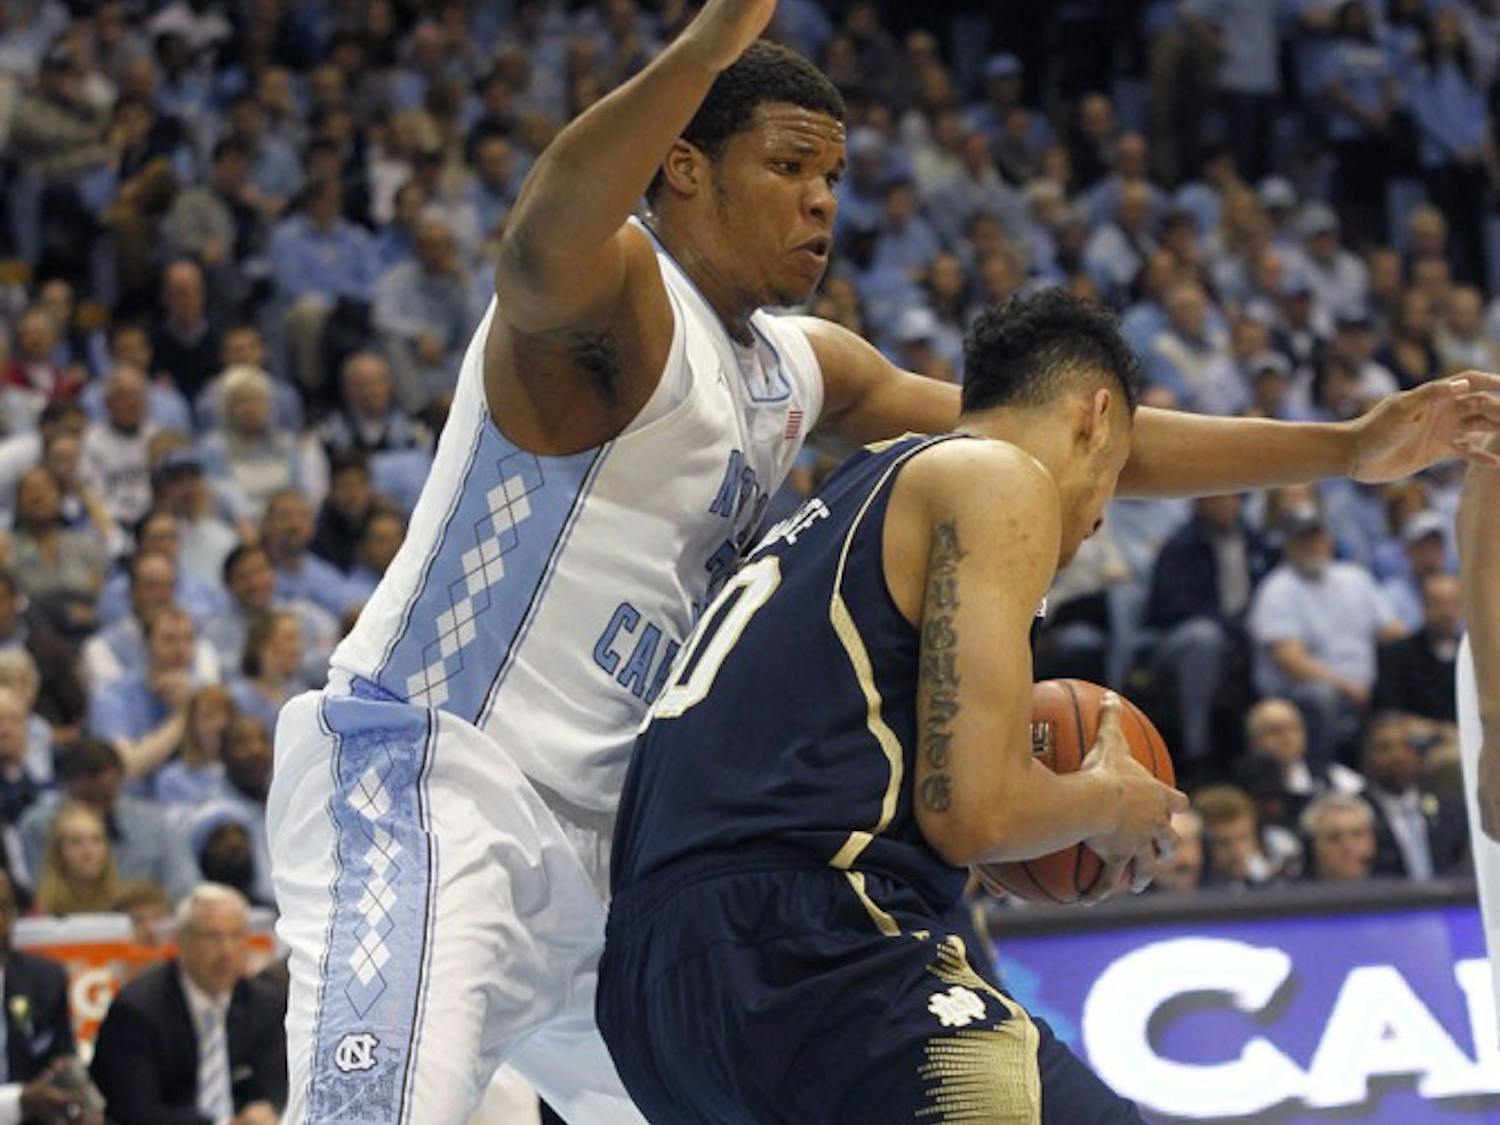 Freshman forward Kennedy Meeks (3) guards the paint against a Notre Dame player. Carolina defeated Notre Dame 63-61 on Monday in the Dean Dome. 